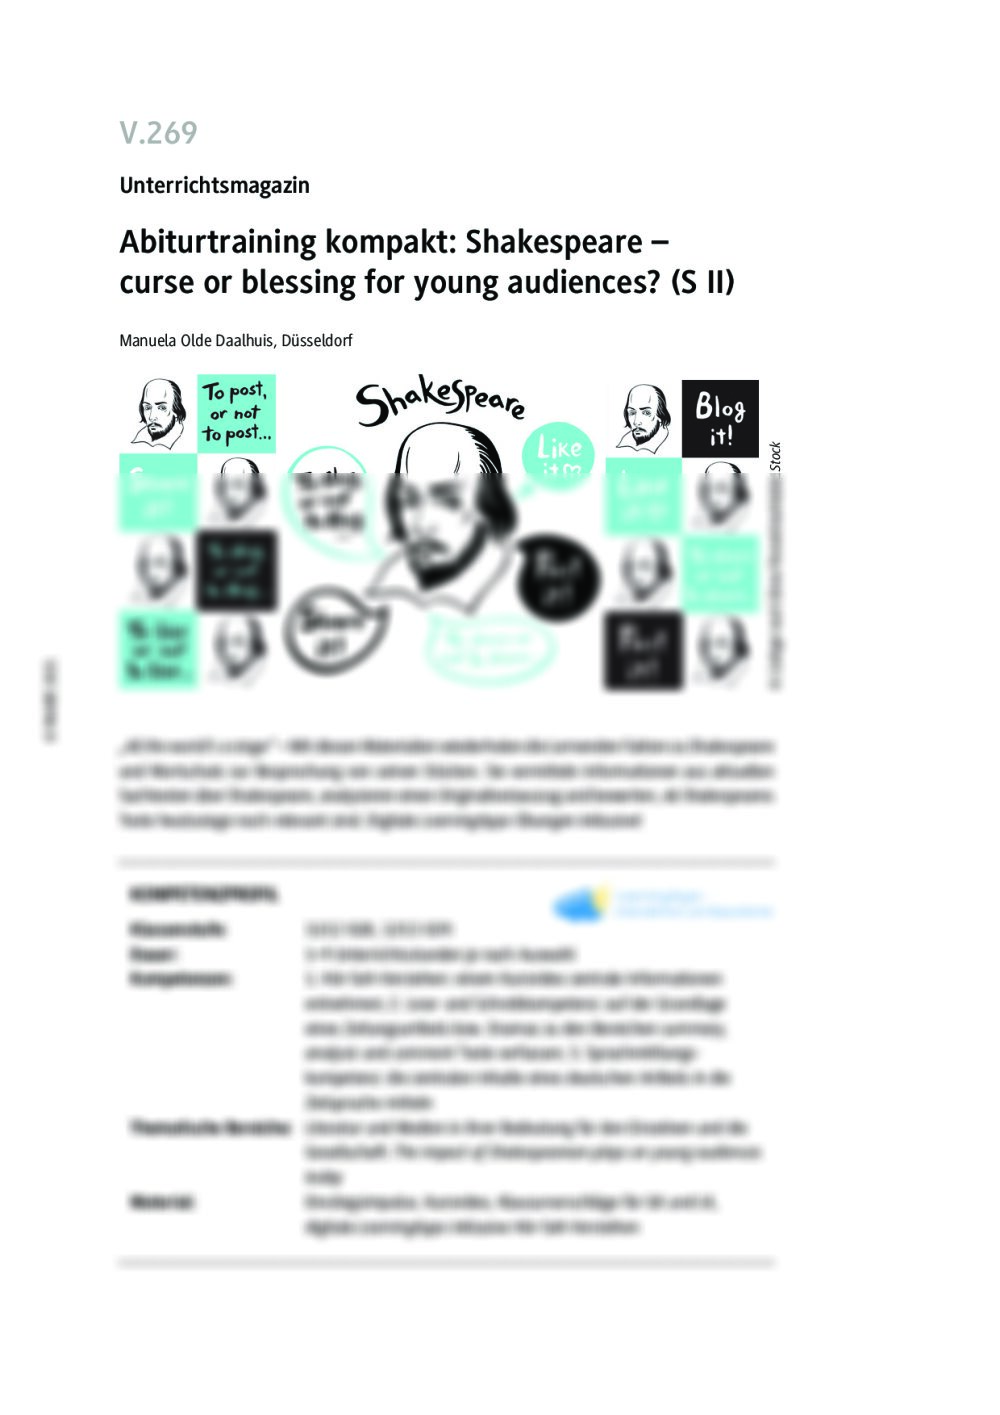 Abiturtraining kompakt: Shakespeare - curse or blessing for young audiences? - Seite 1